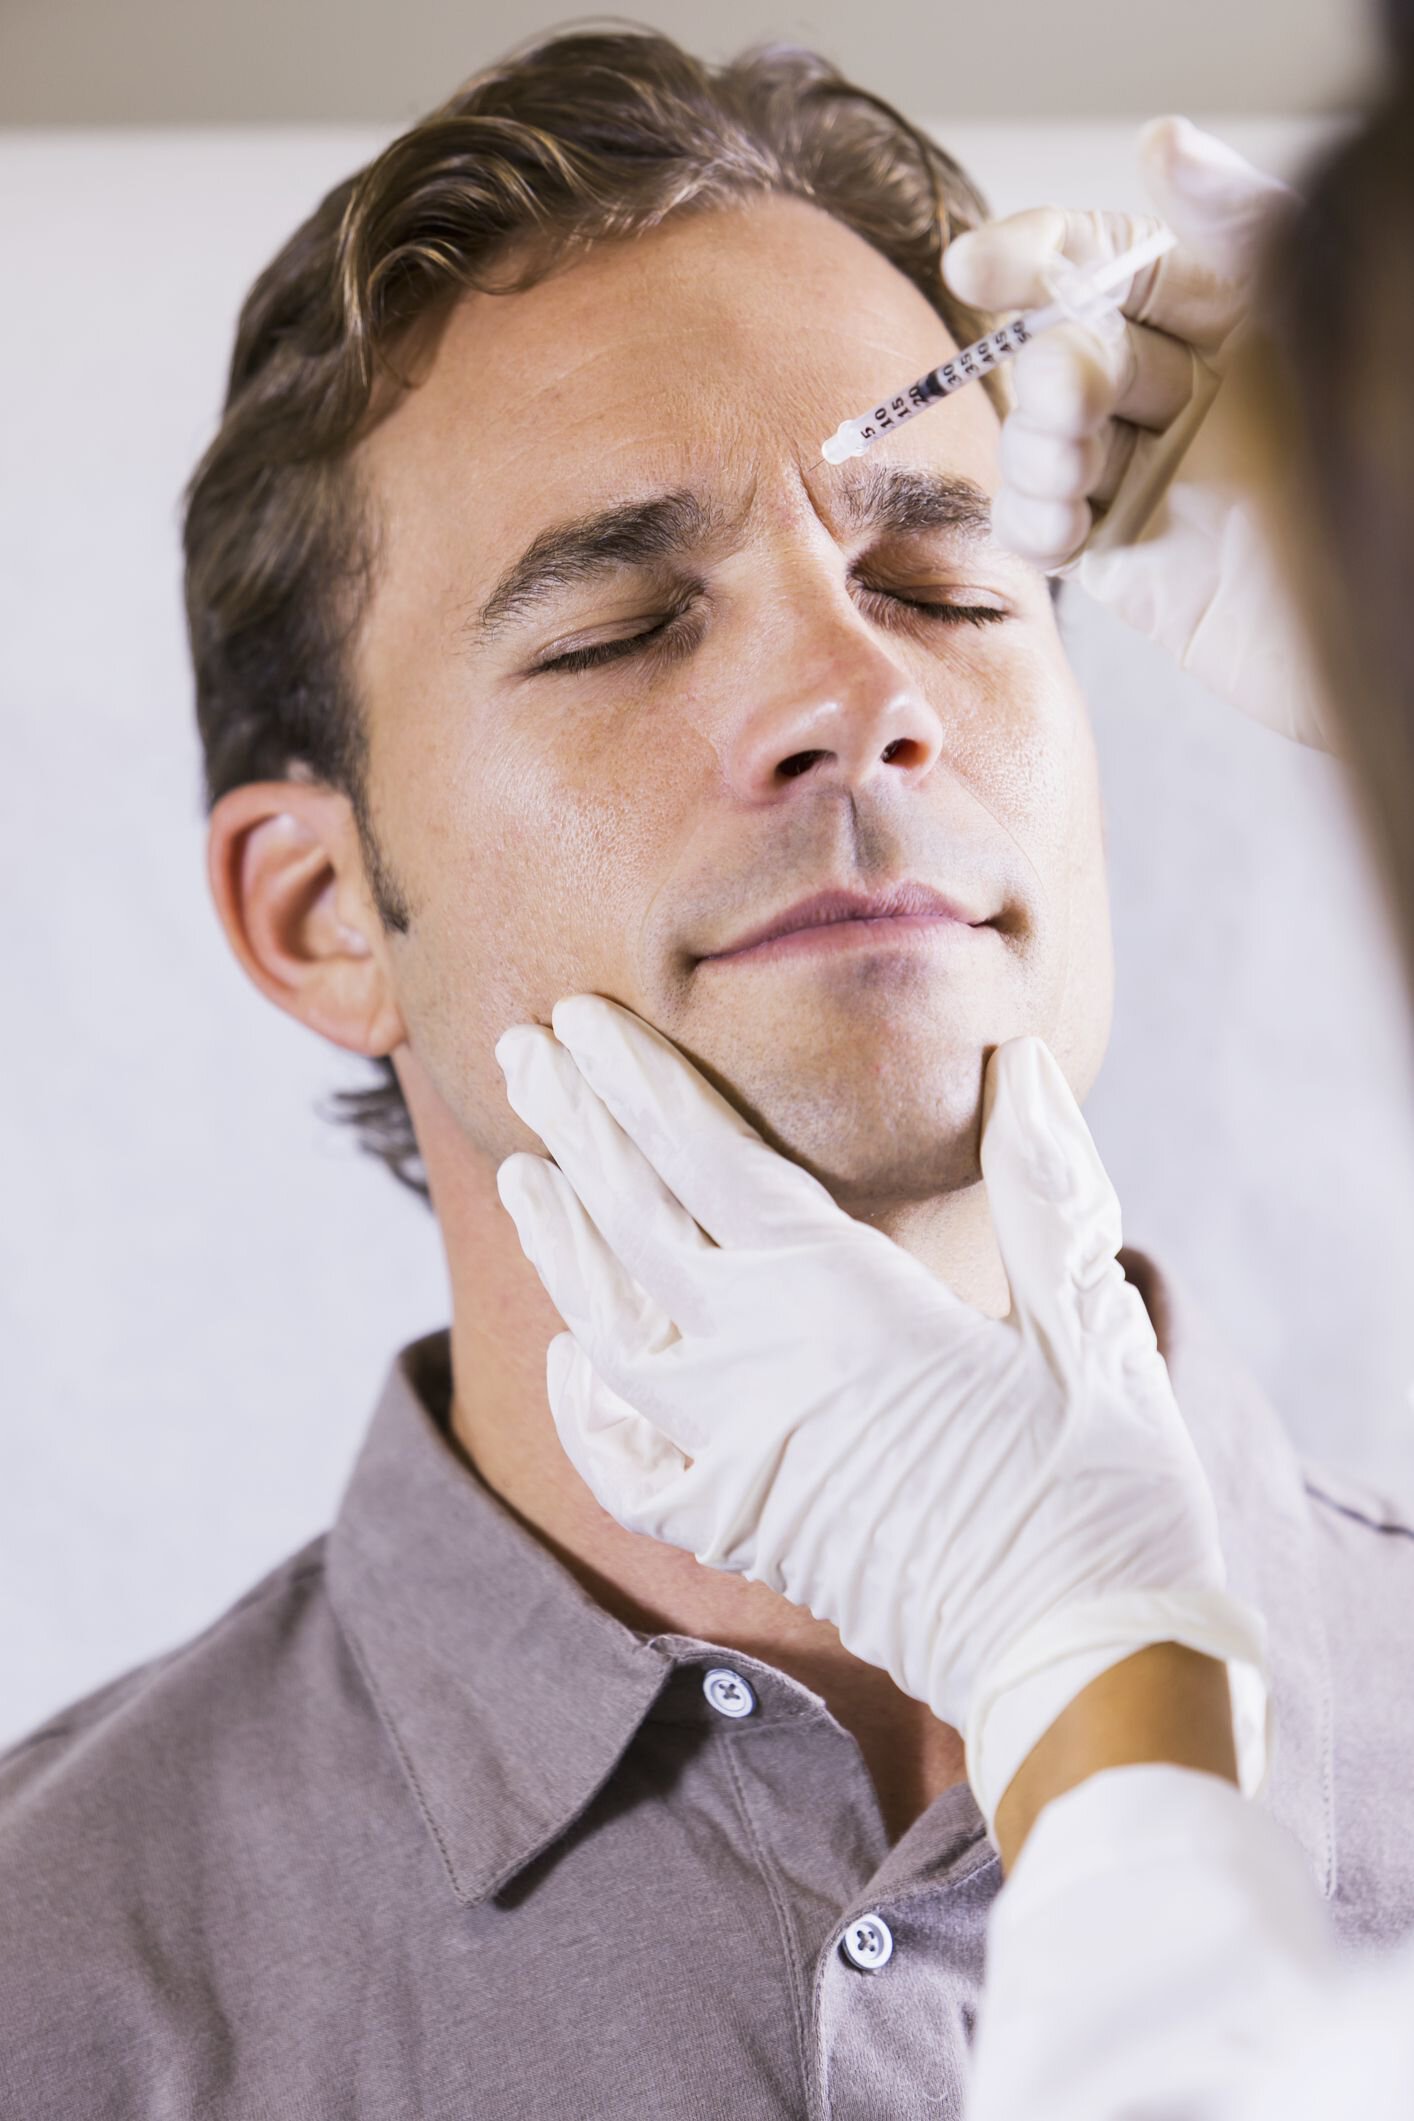 A man getting a cosmetic injection